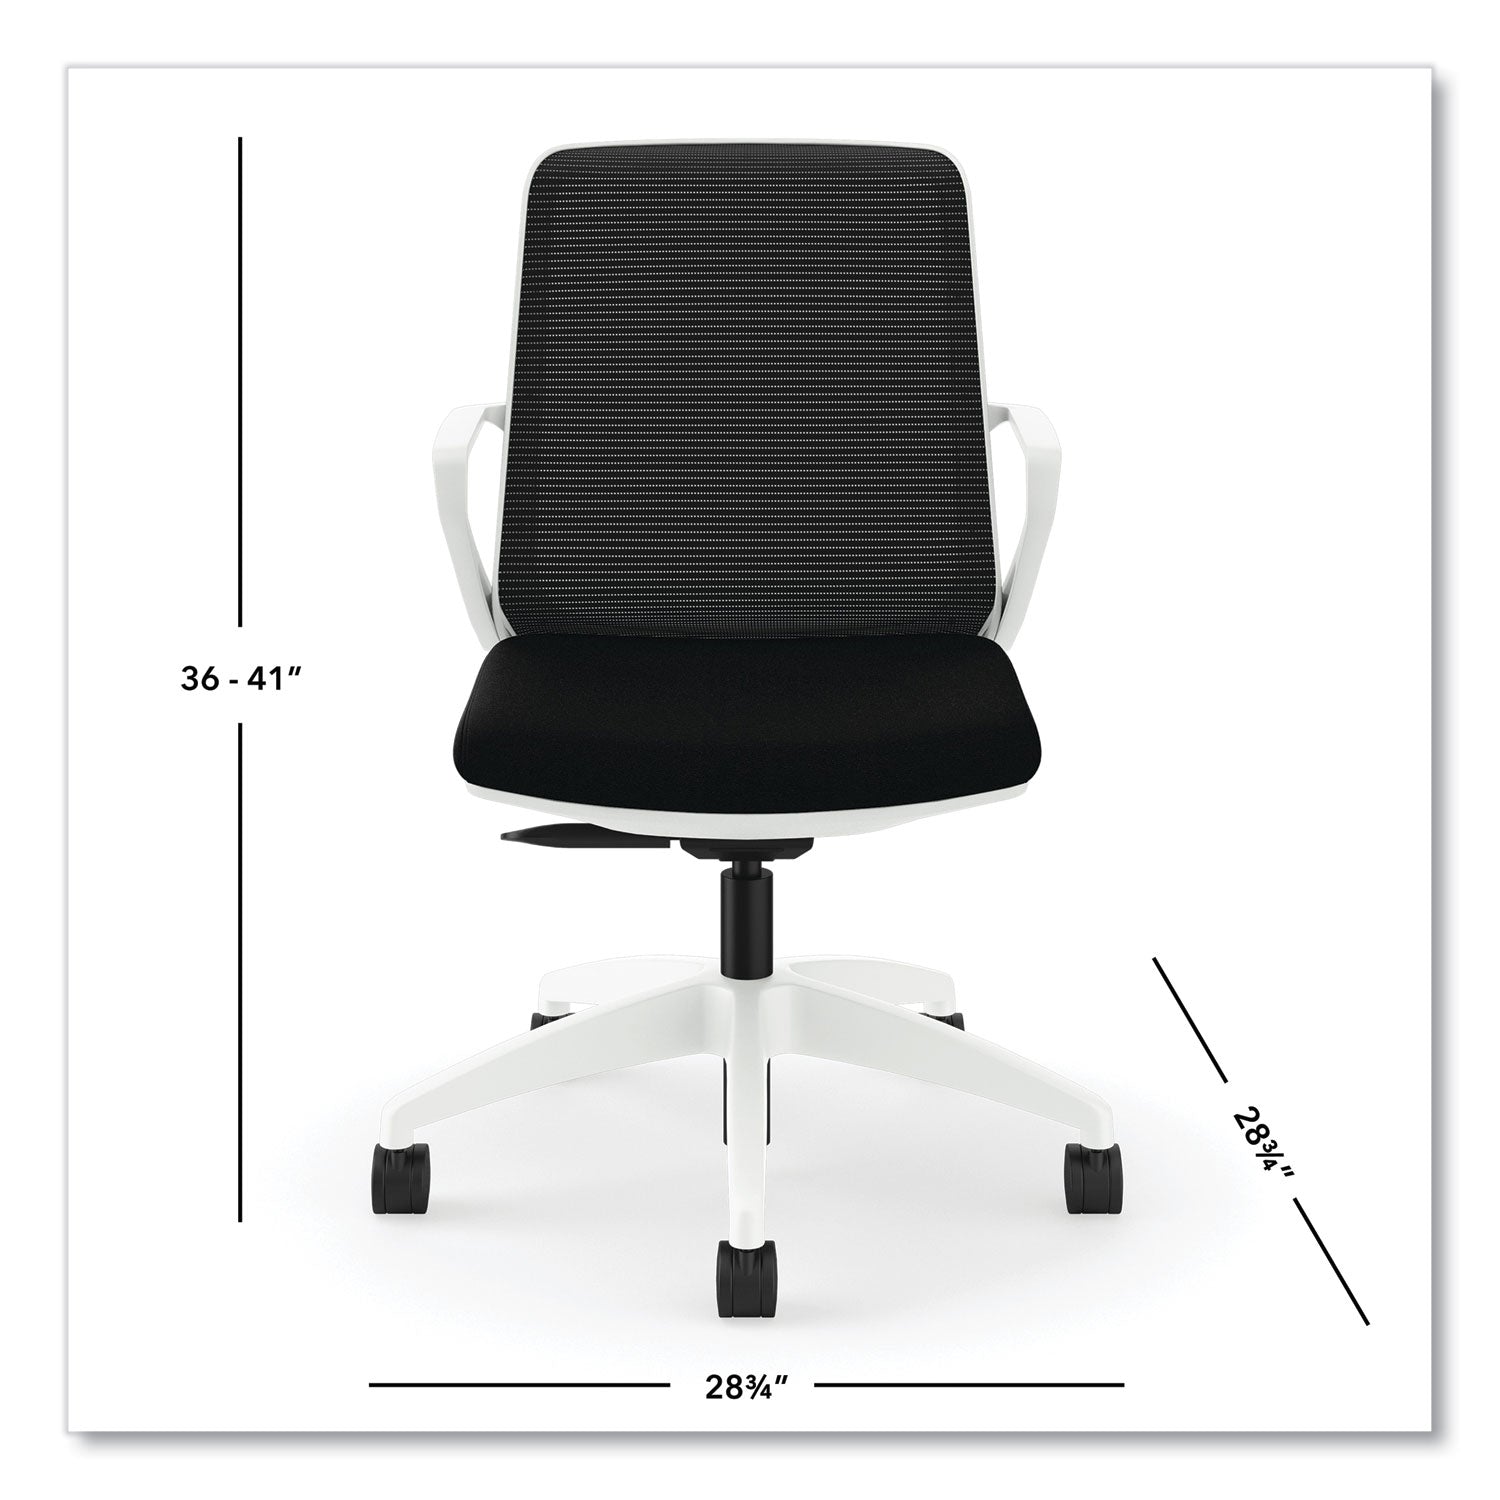 cliq-office-chair-supports-up-to-300-lb-17-to-22-seat-height-black-seat-back-white-base-ships-in-7-10-business-days_honclqimcu10dw - 2